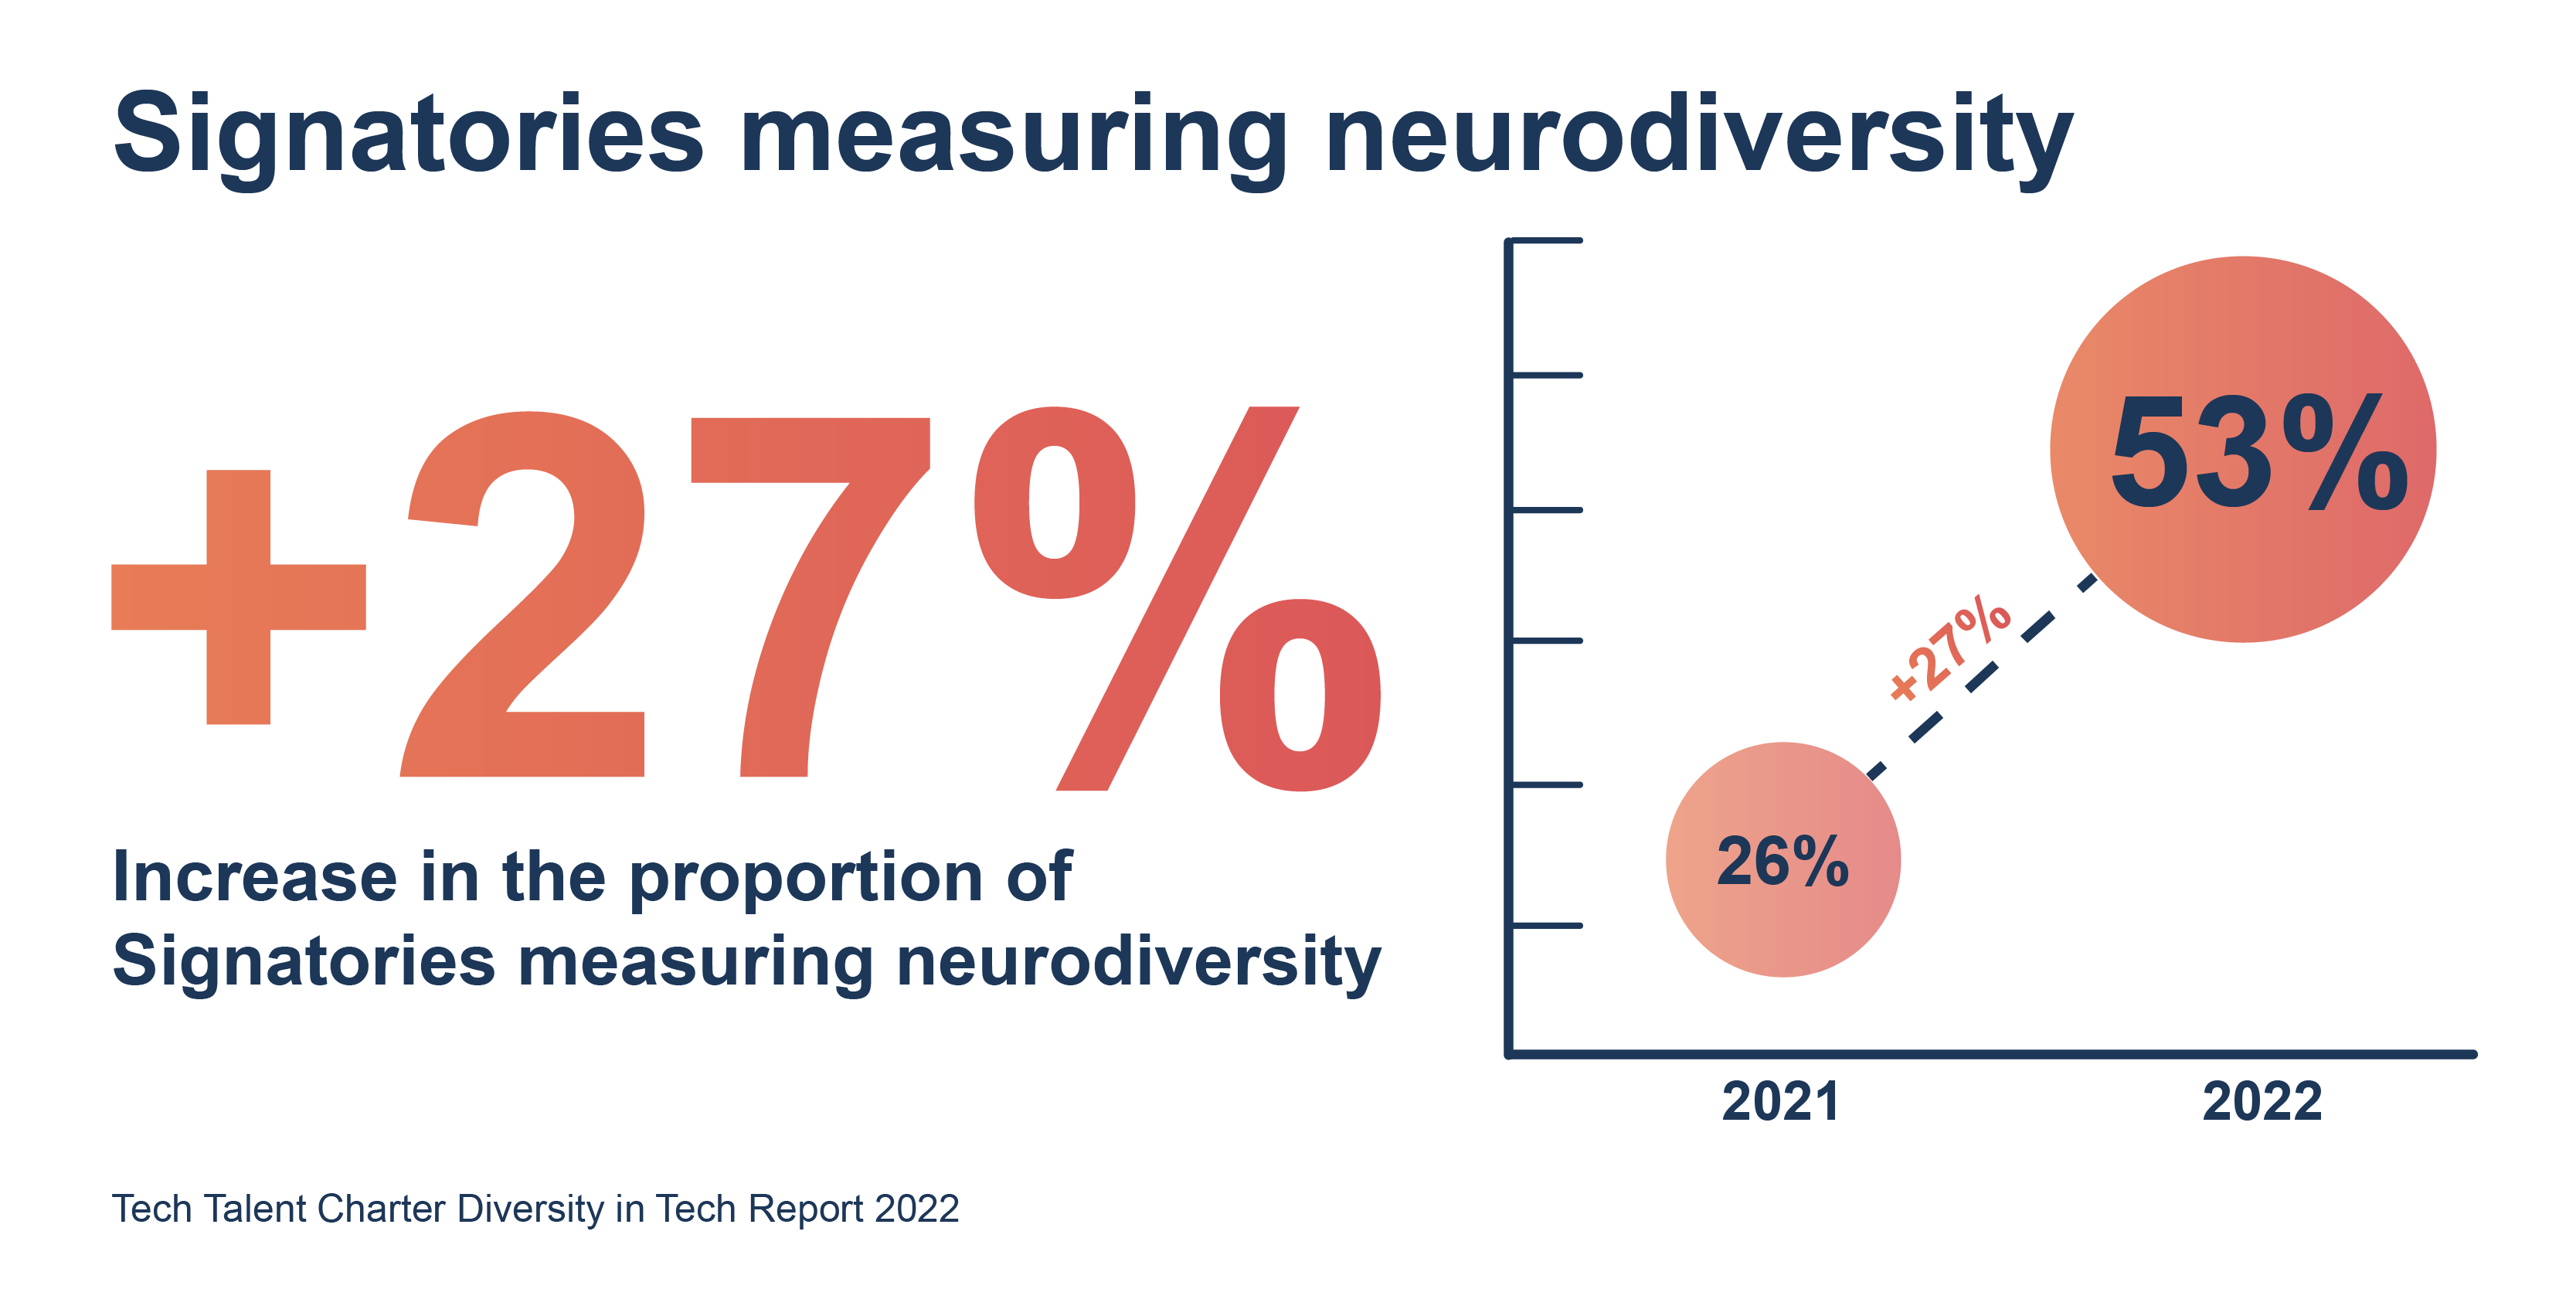 There is a 27% increase in the proportion of Signatories measuring neurodiversity when compared to last year's figures.